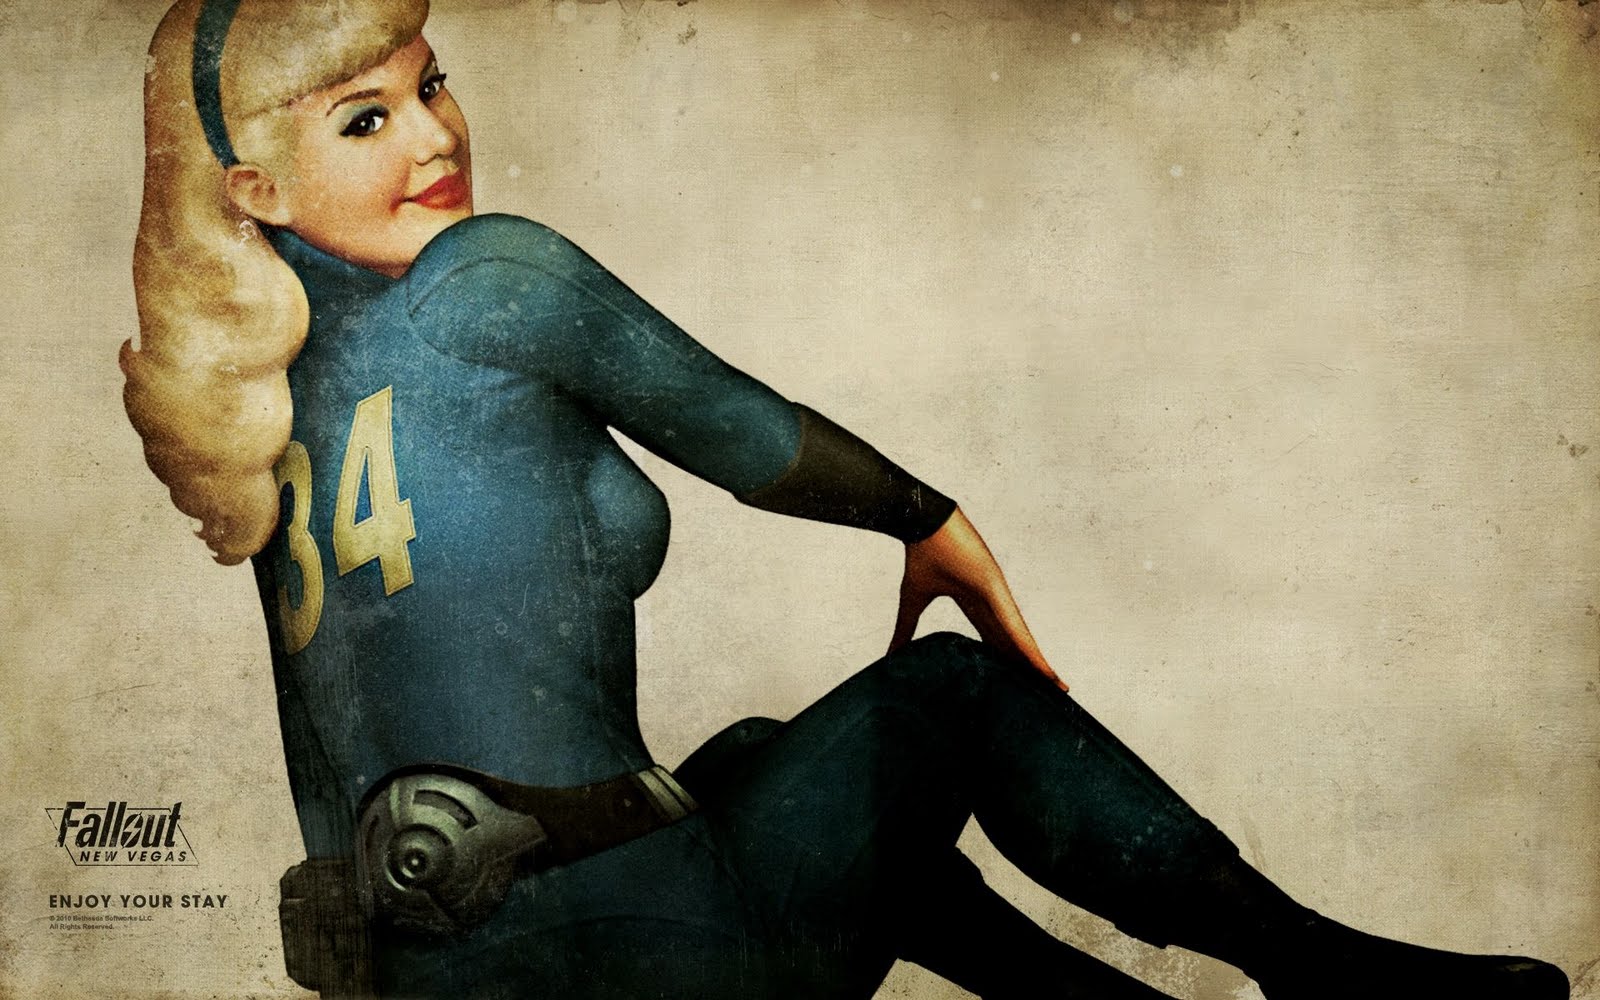 New Fallout Desktop Wallpaper Posted Here Buy Bobbleheads At